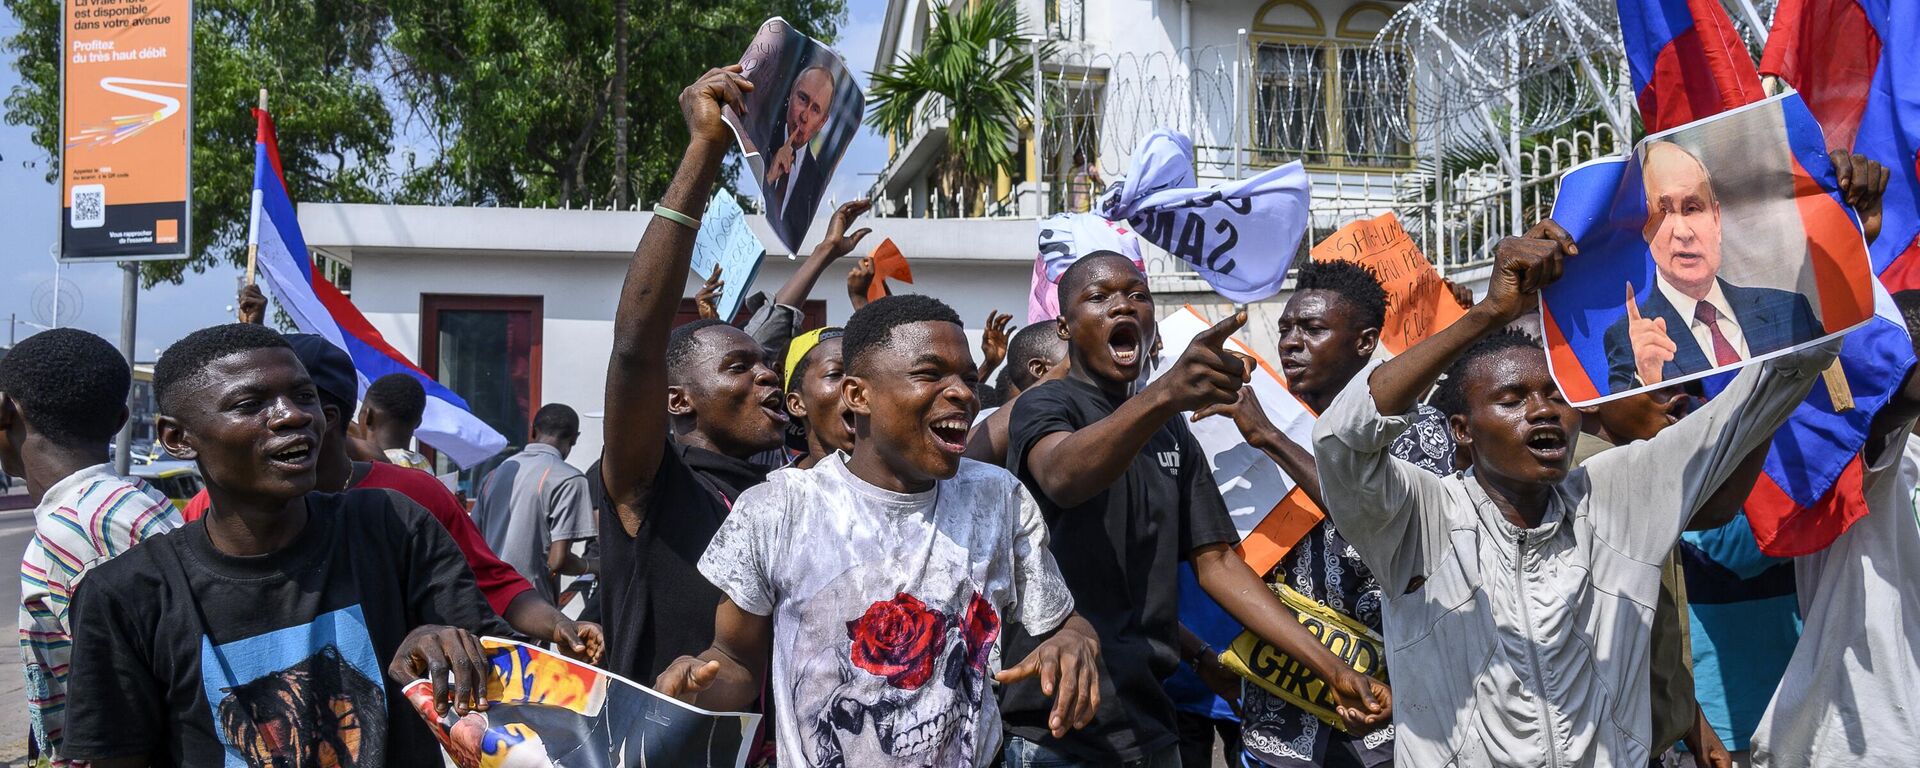 Protesters waving Russian flags gather in front of the French Embassy in Kinshasa on March 1, 2023 for a demonstration against the visit to the Democratic Republic of Congo of French President Emmanuel Macron - Sputnik International, 1920, 02.03.2023